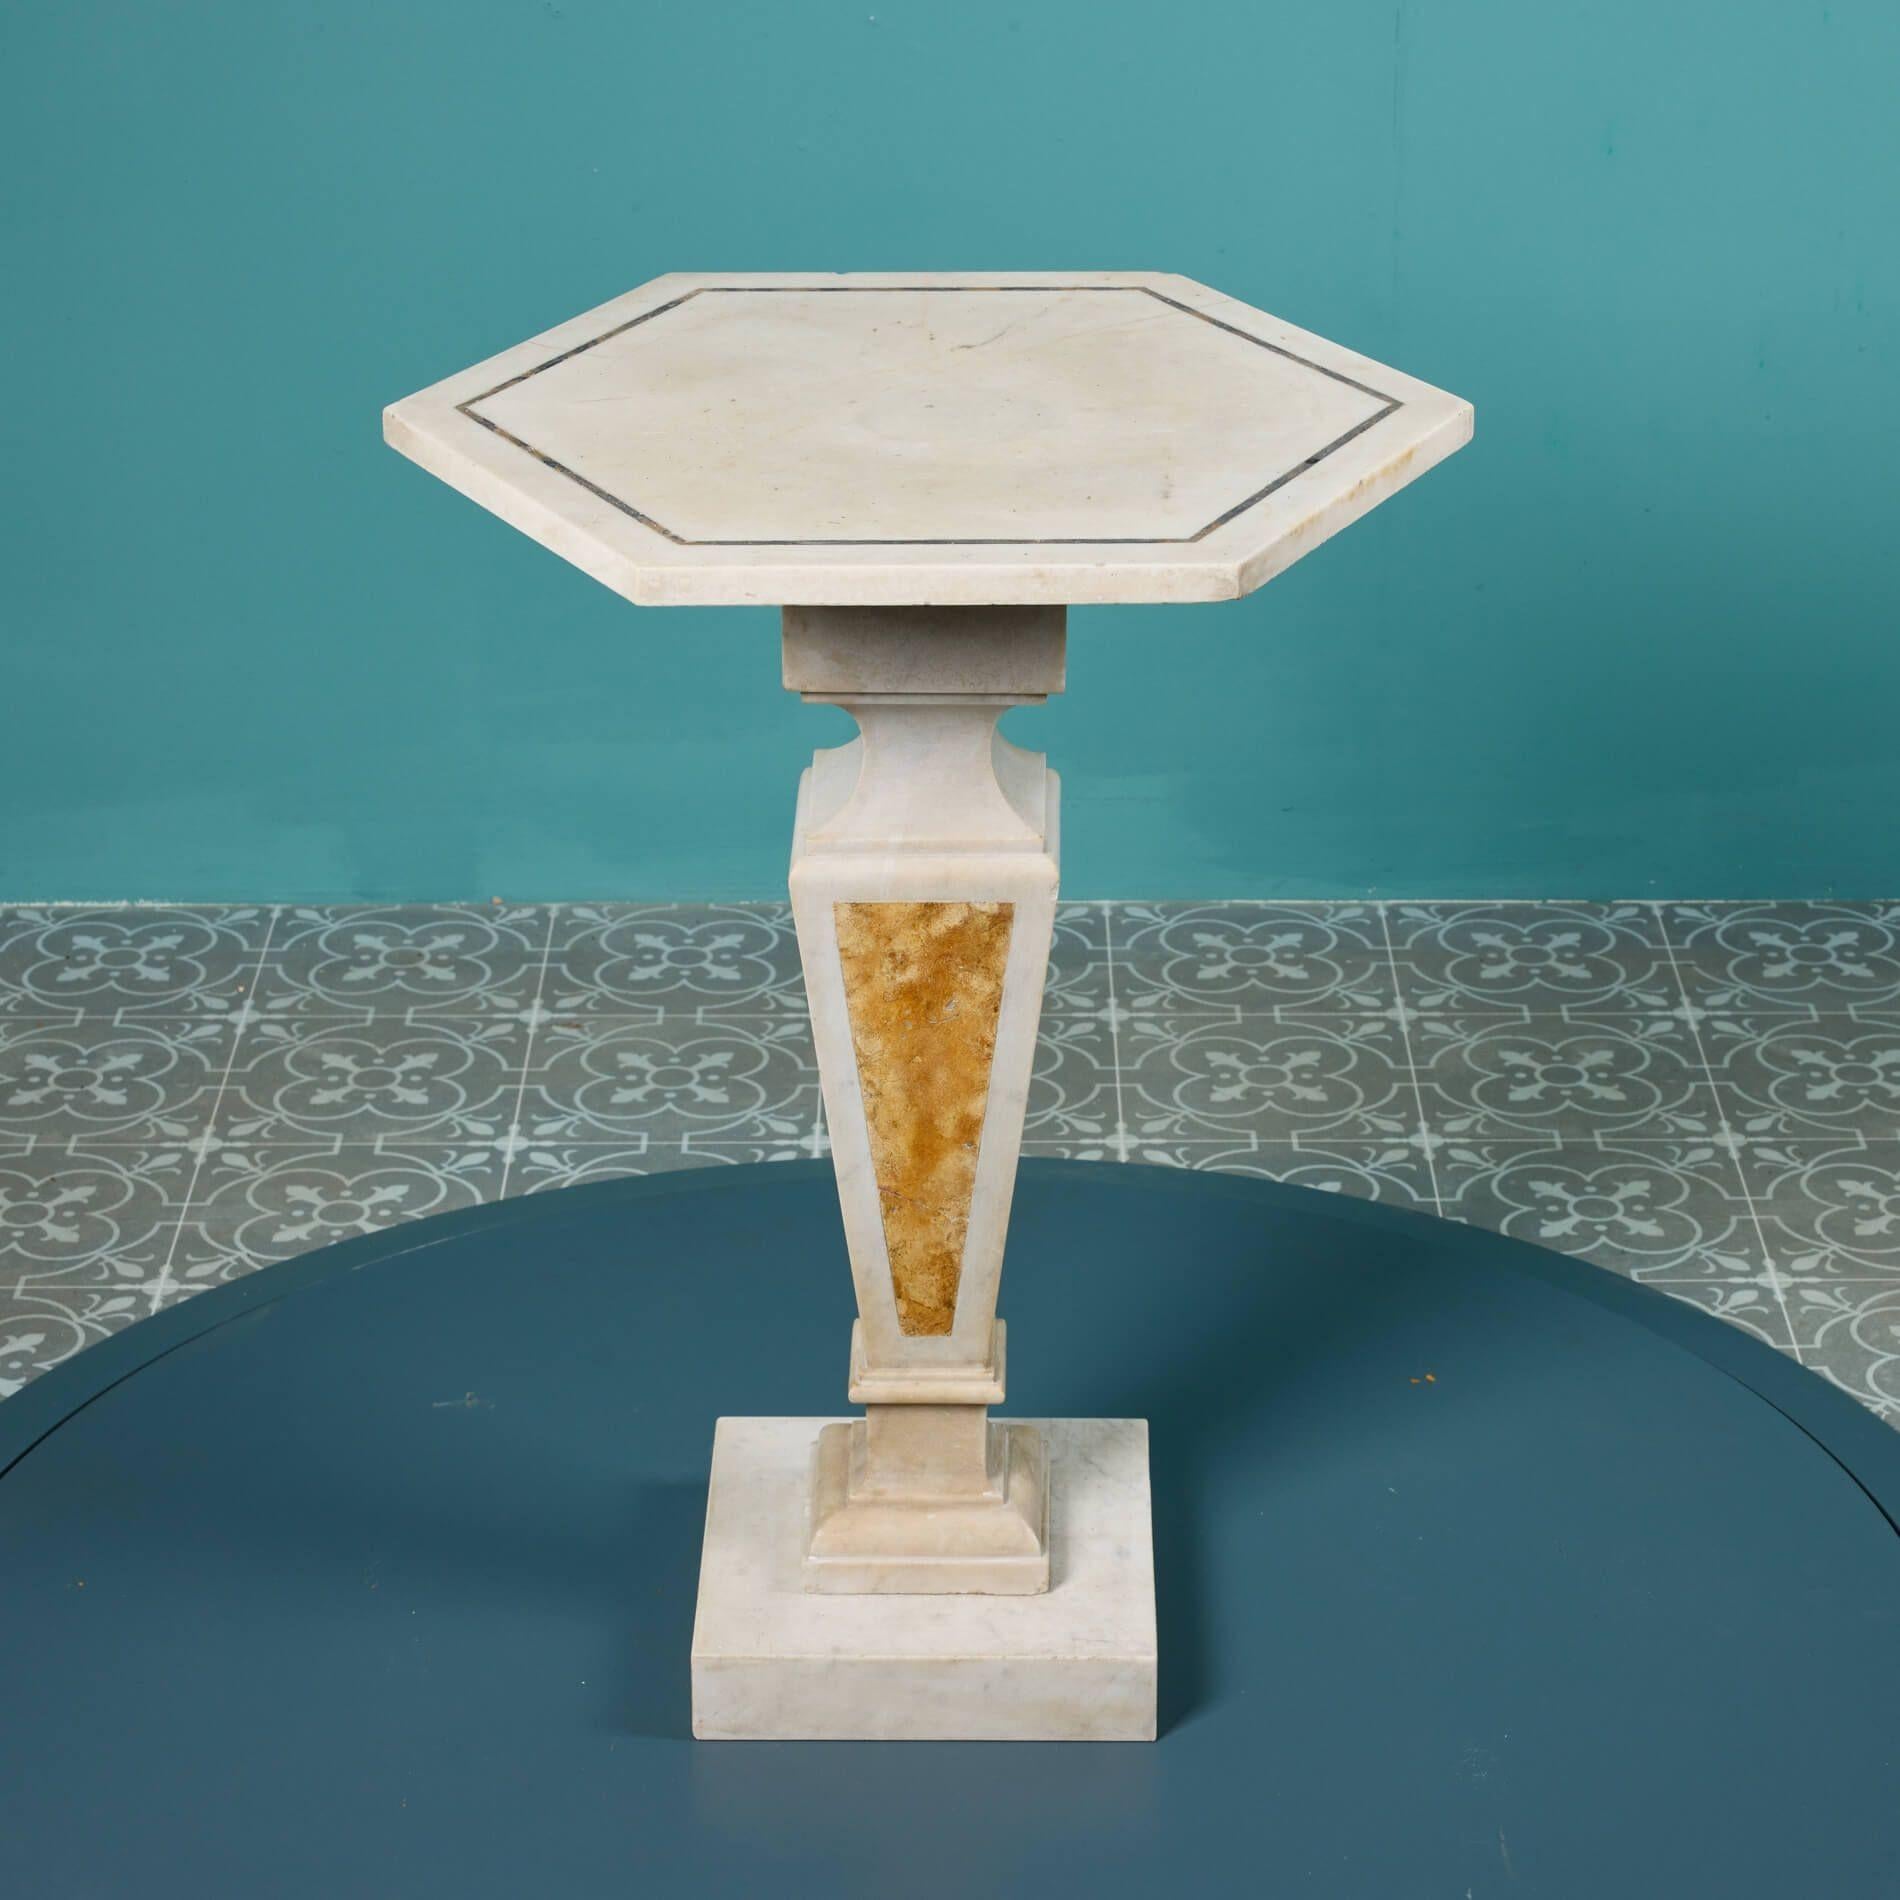 Originating from Italy, this antique marble centre table is over 200 years old, dating from the early 1800s. Perhaps it once graced the sunlit halls of a 19th century Italian villa, sitting elegantly alongside a decadent chaise. The design is